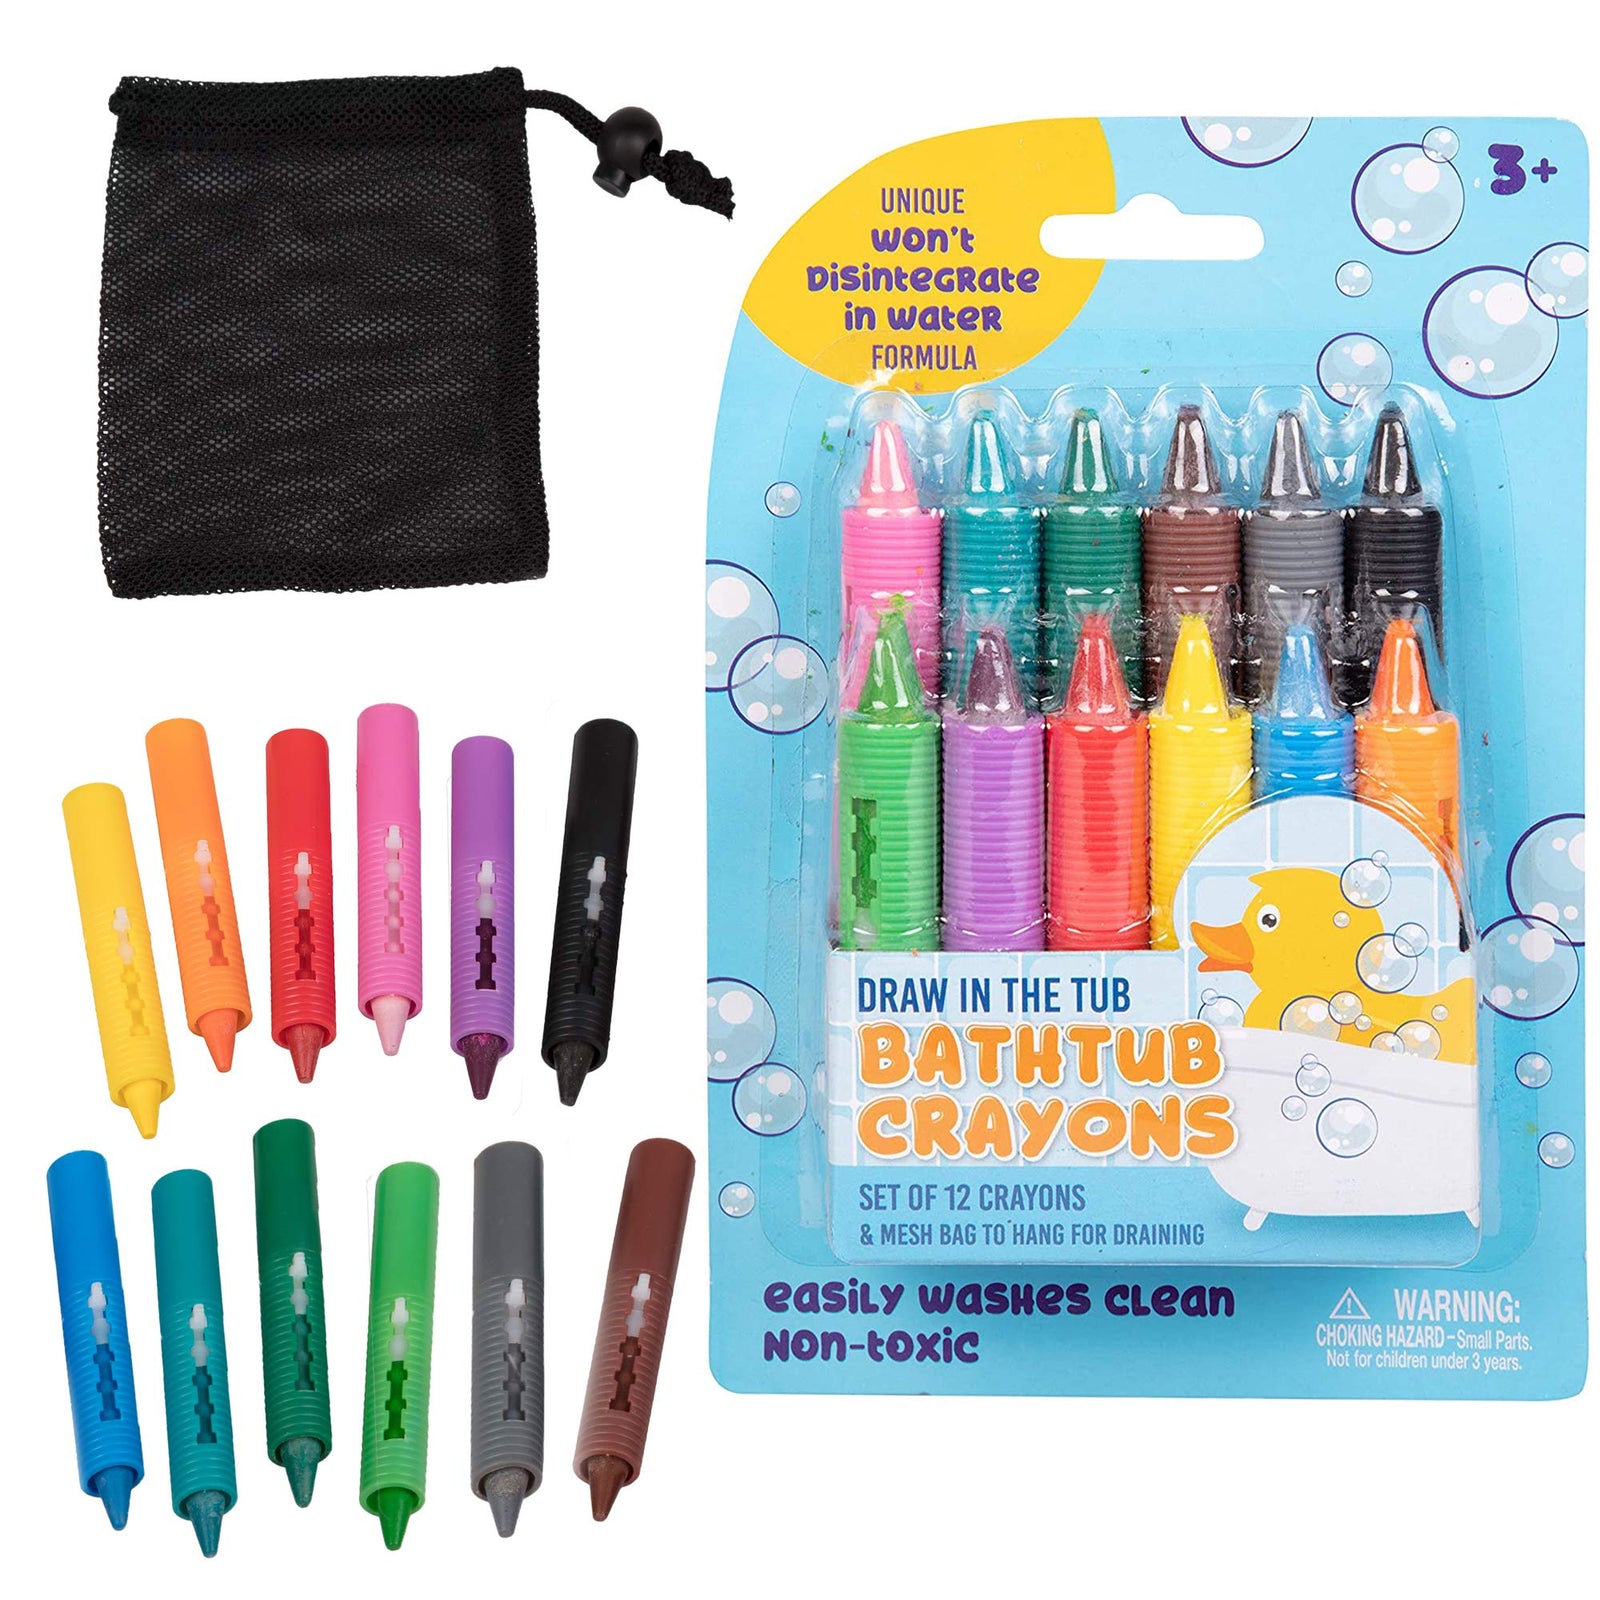 Bath Crayons Super Set - Set of 12 Draw in The Tub Colors with Bathtub Mesh Bag, Unique Won't Disintegrate in Water Formula - Easter Basket